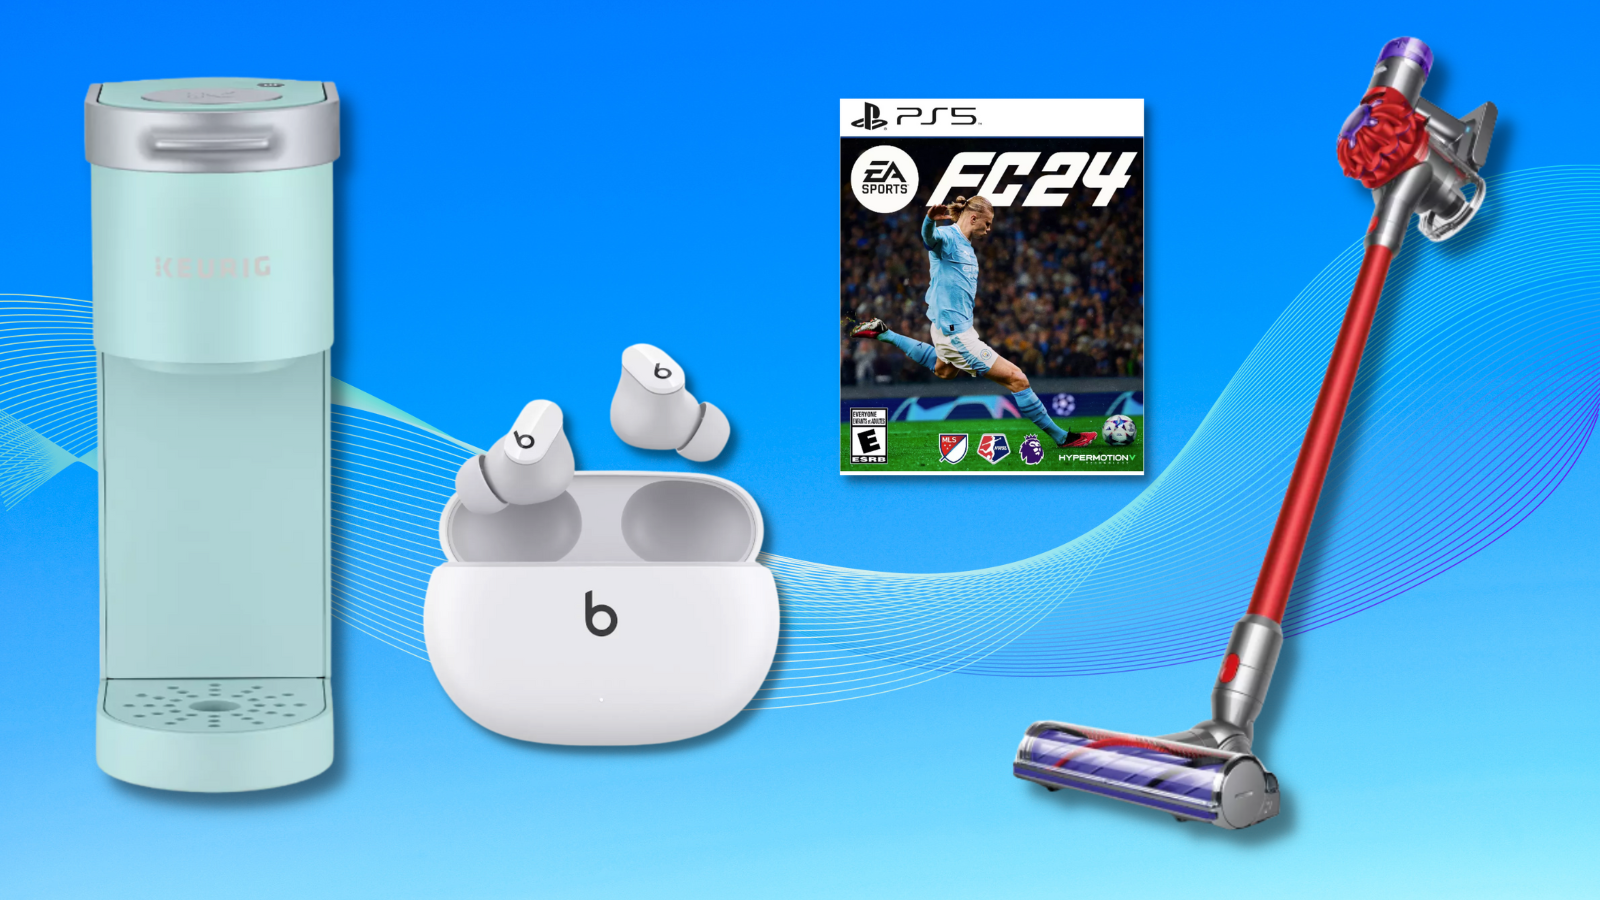 last-minute gifts from Keurig, EA Sports, Dyson, and Beats against a blue background